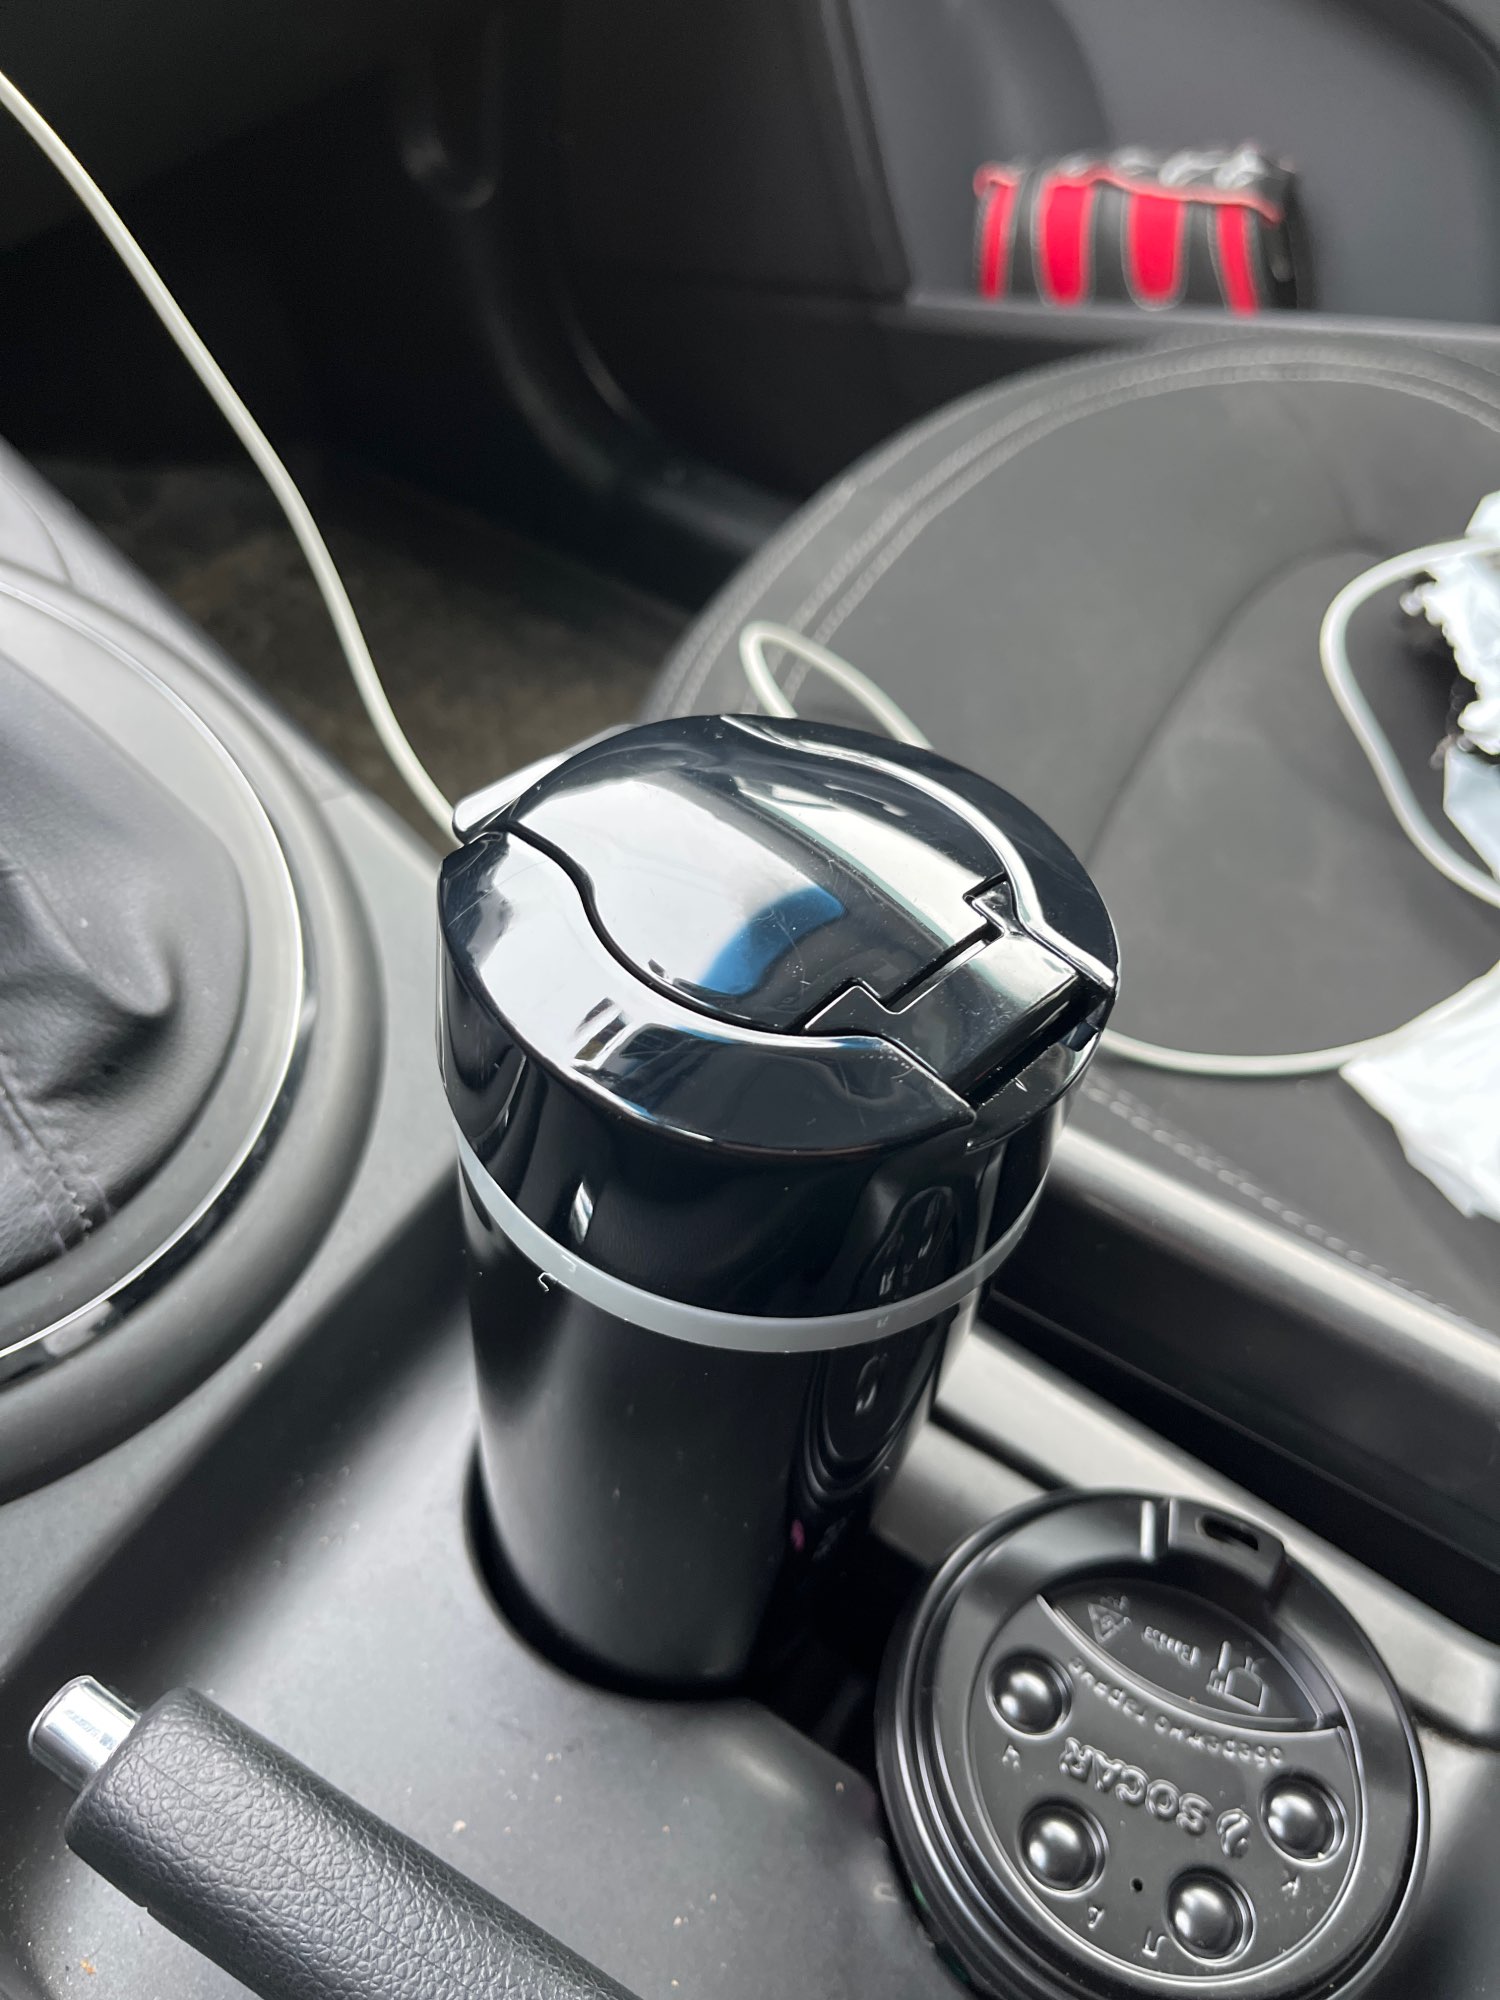 Electric Kettle For Car Heating, Kettle Kettle Display LCD Screen photo review